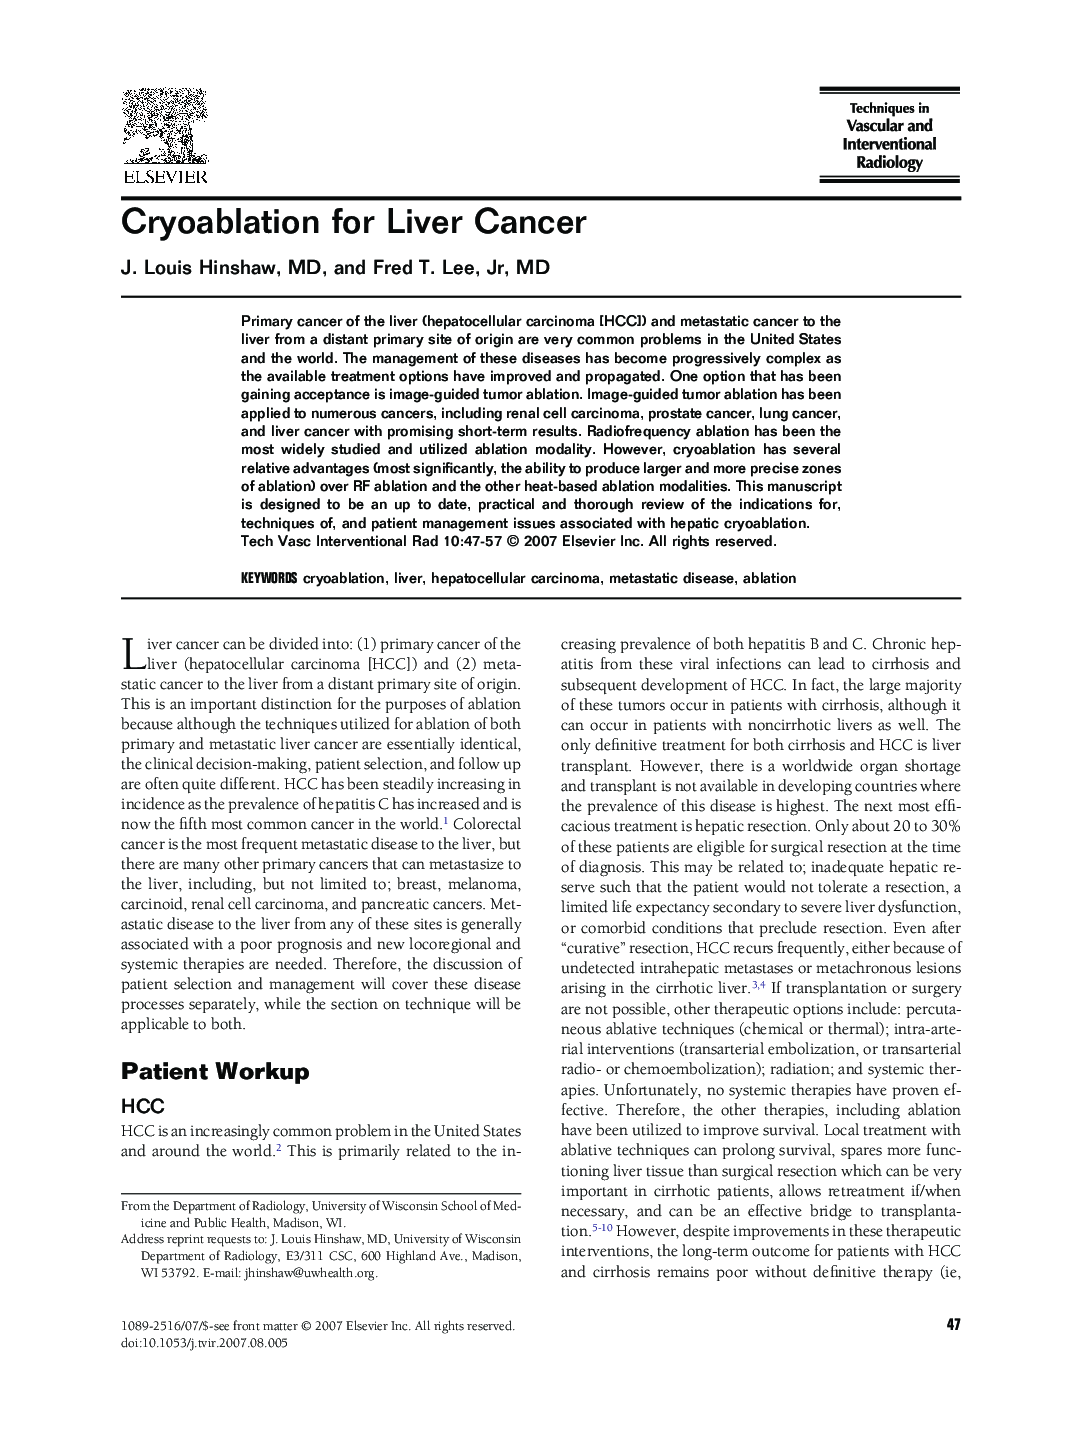 Cryoablation for Liver Cancer